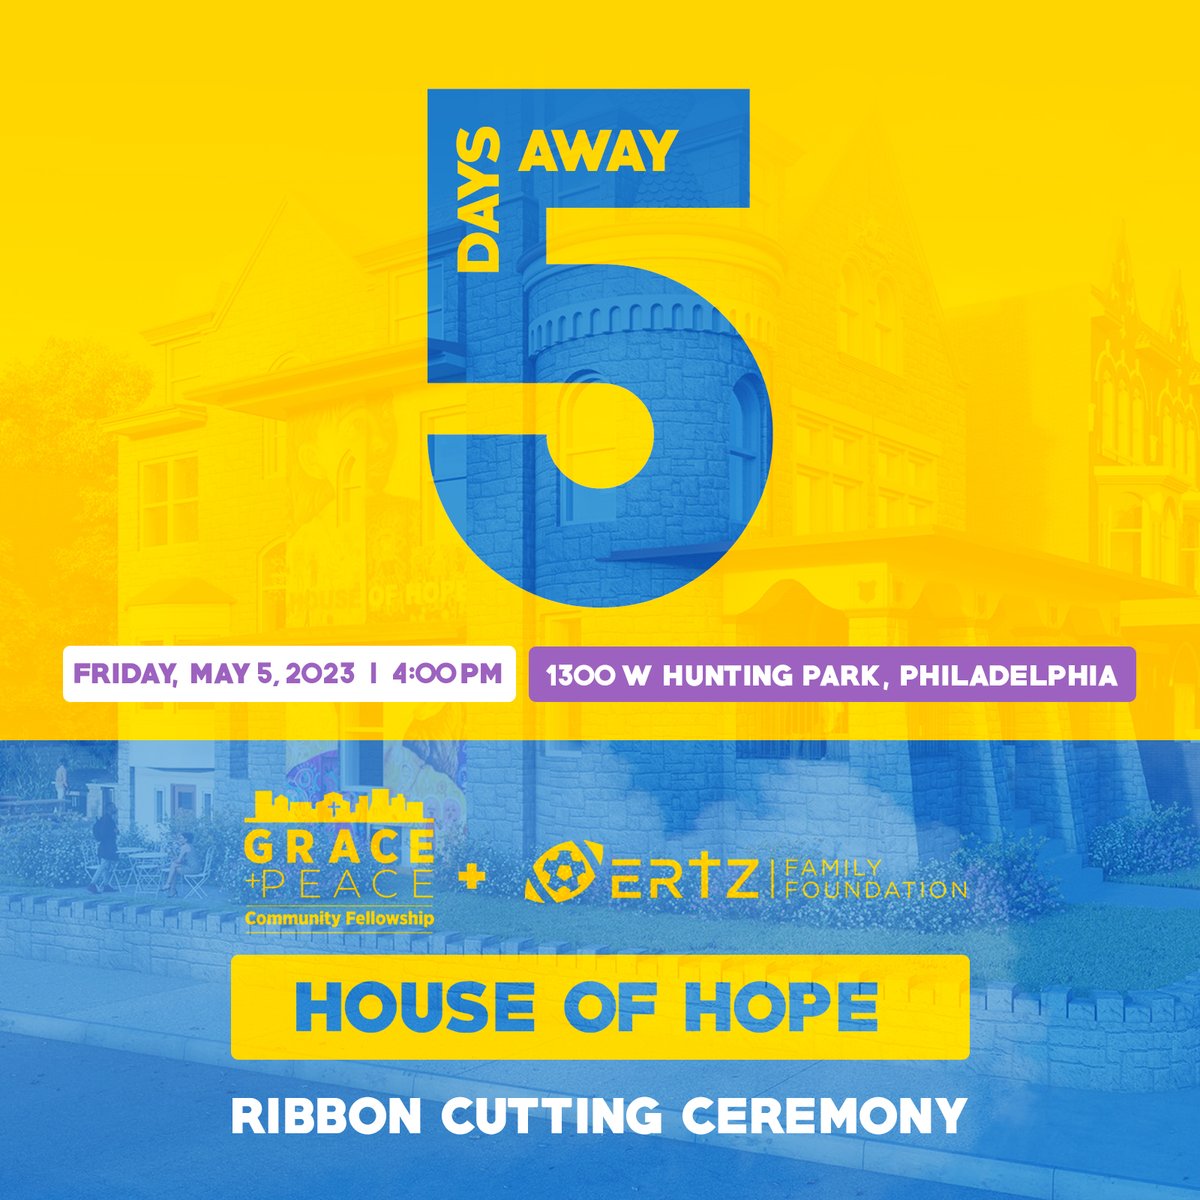 It's officially May which means we're officially just 5 days away from the #HouseOfHope Ribbon Cutting Ceremony 🎉 We can't wait for the community to see this incredible place of worship and sanctuary. Join us on May 5th at 4:00pm EDT in North Philadelphia at 1300 W Hunting Park.